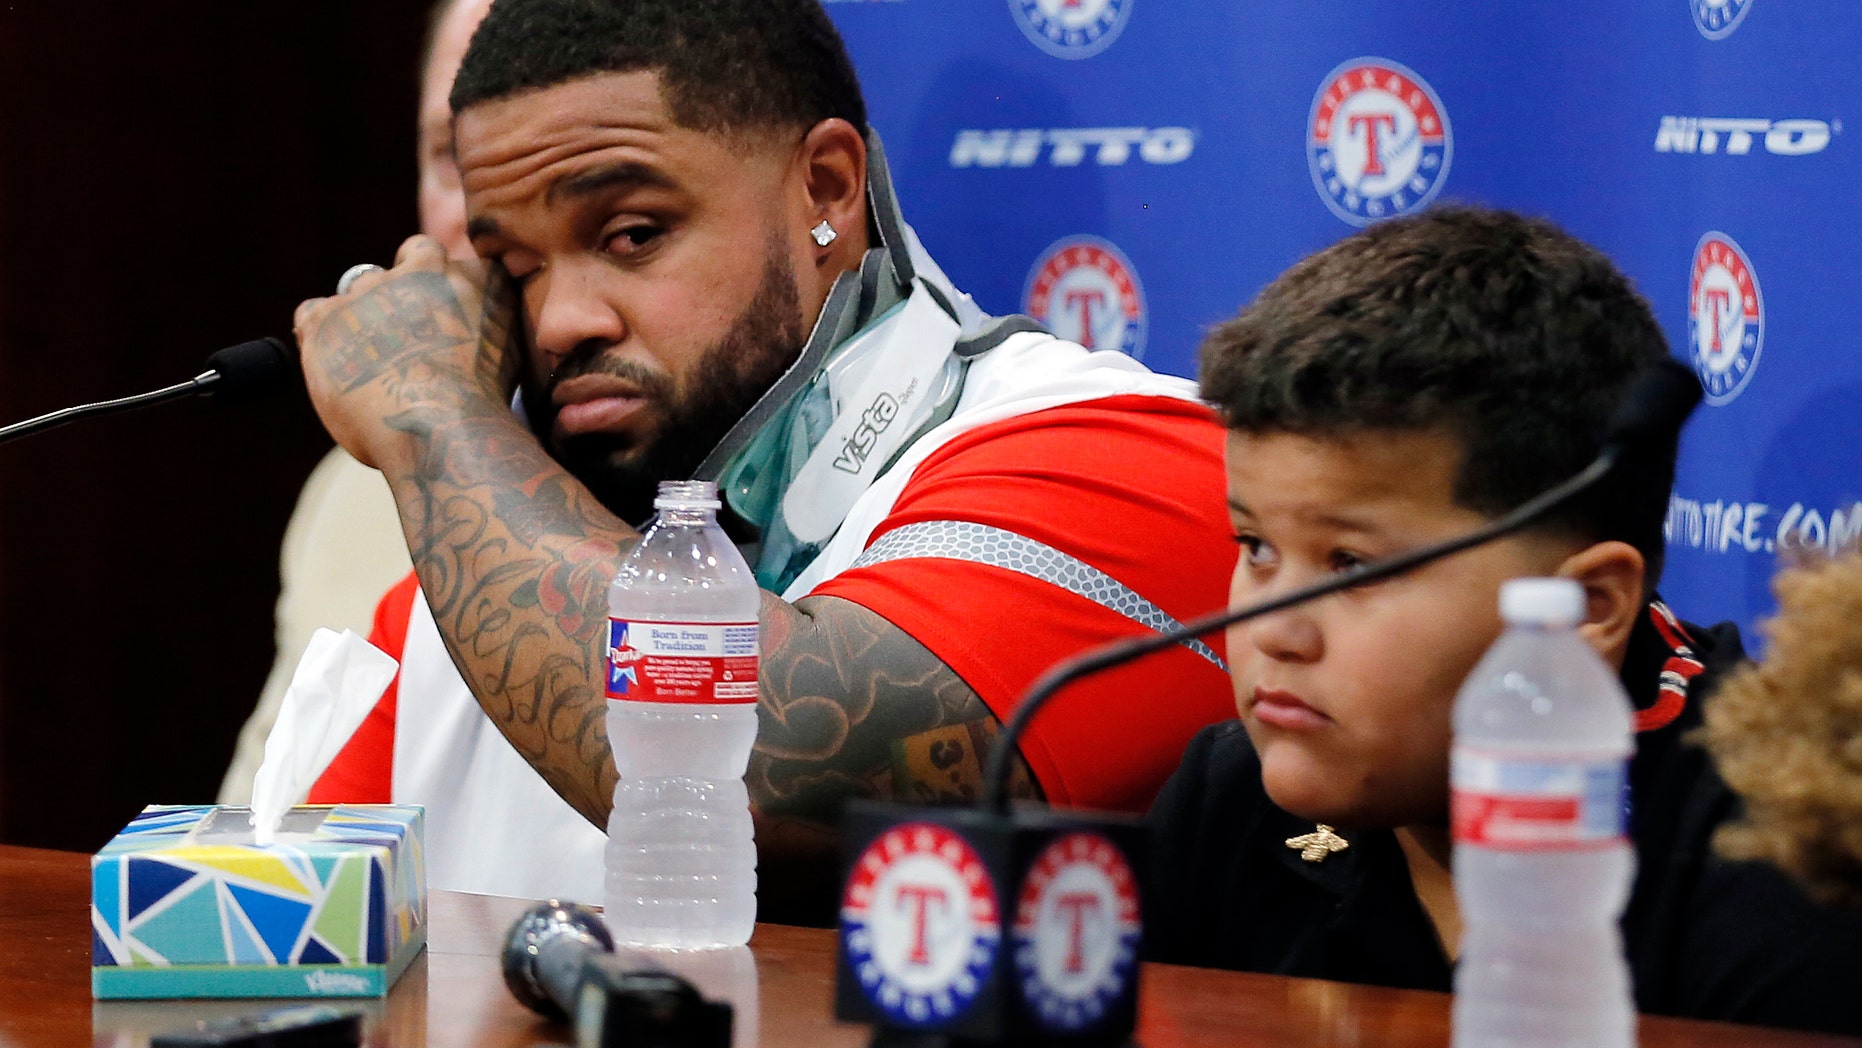 Texas Rangers Slugger Prince Fielder Gets Emotional As He Ends His 